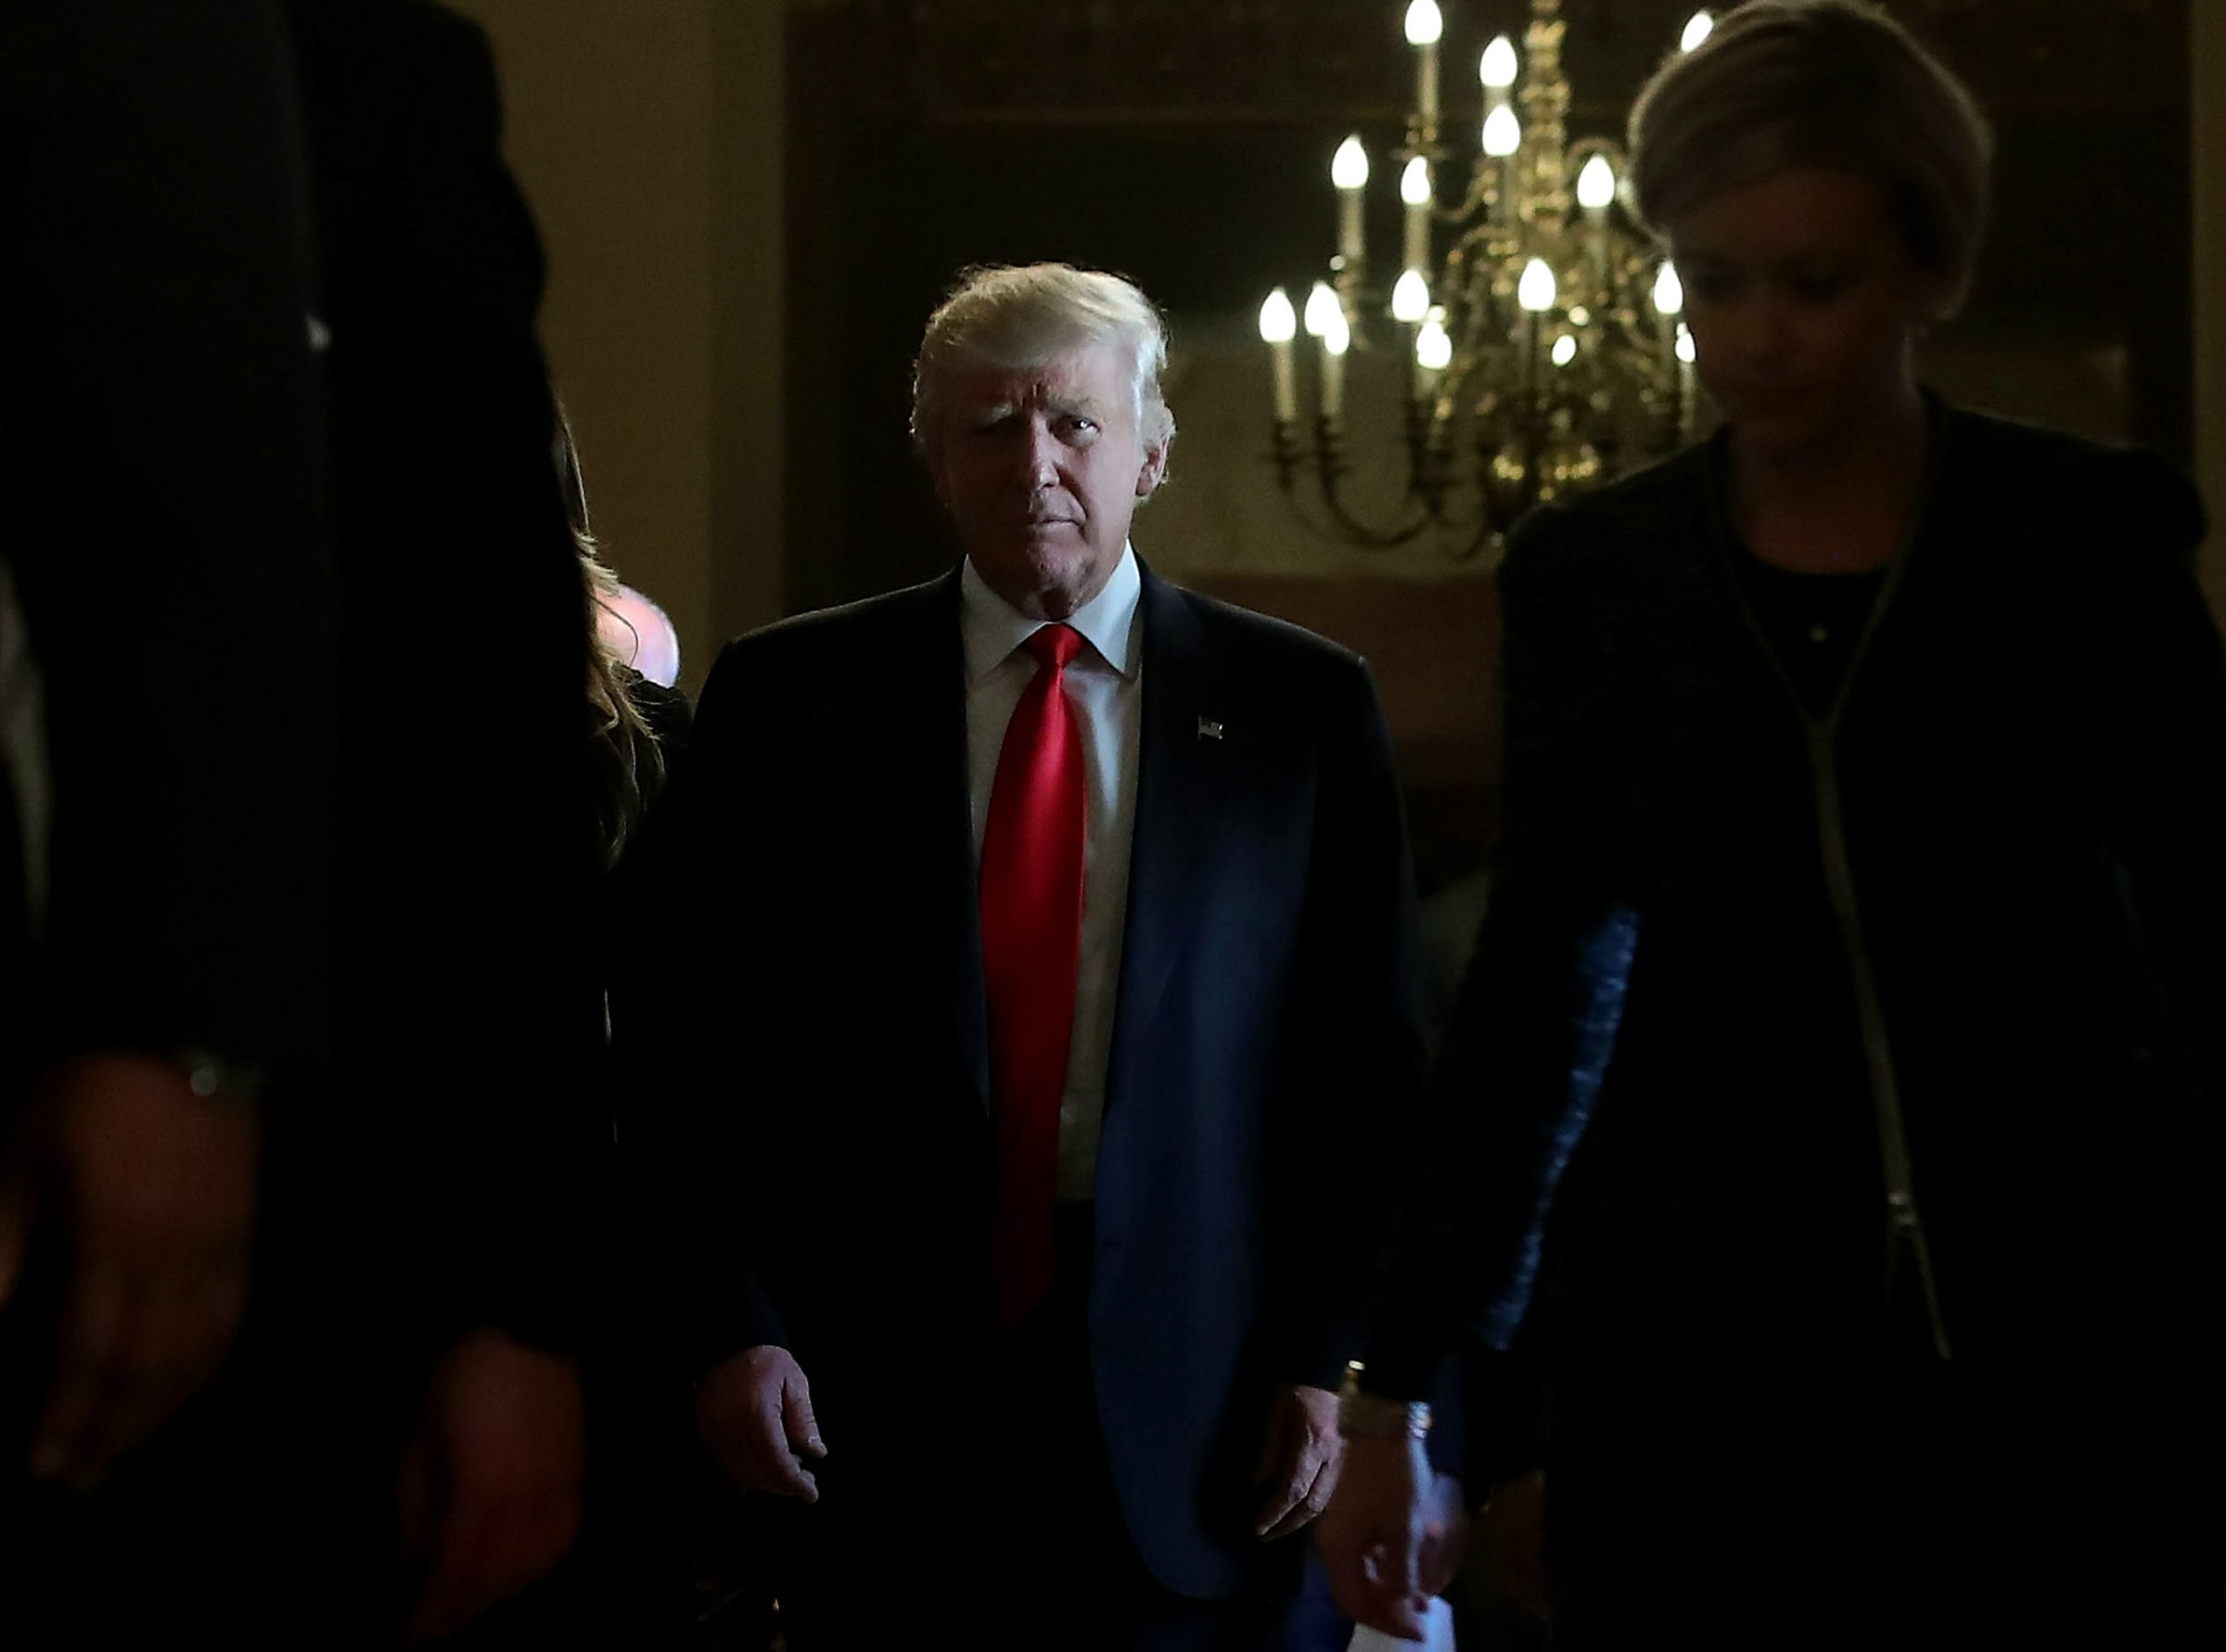 WASHINGTON, DC - NOVEMBER 10: President-elect Donald Trump walks from a meeting with Senate Majority Leader Mitch McConnell at the U.S. Capitol November 10, 2016 in Washington, DC. Earlier in the day president-elect Trump met with U.S. President Barack Obama at the White House. (Photo by Mark Wilson/Getty Images)